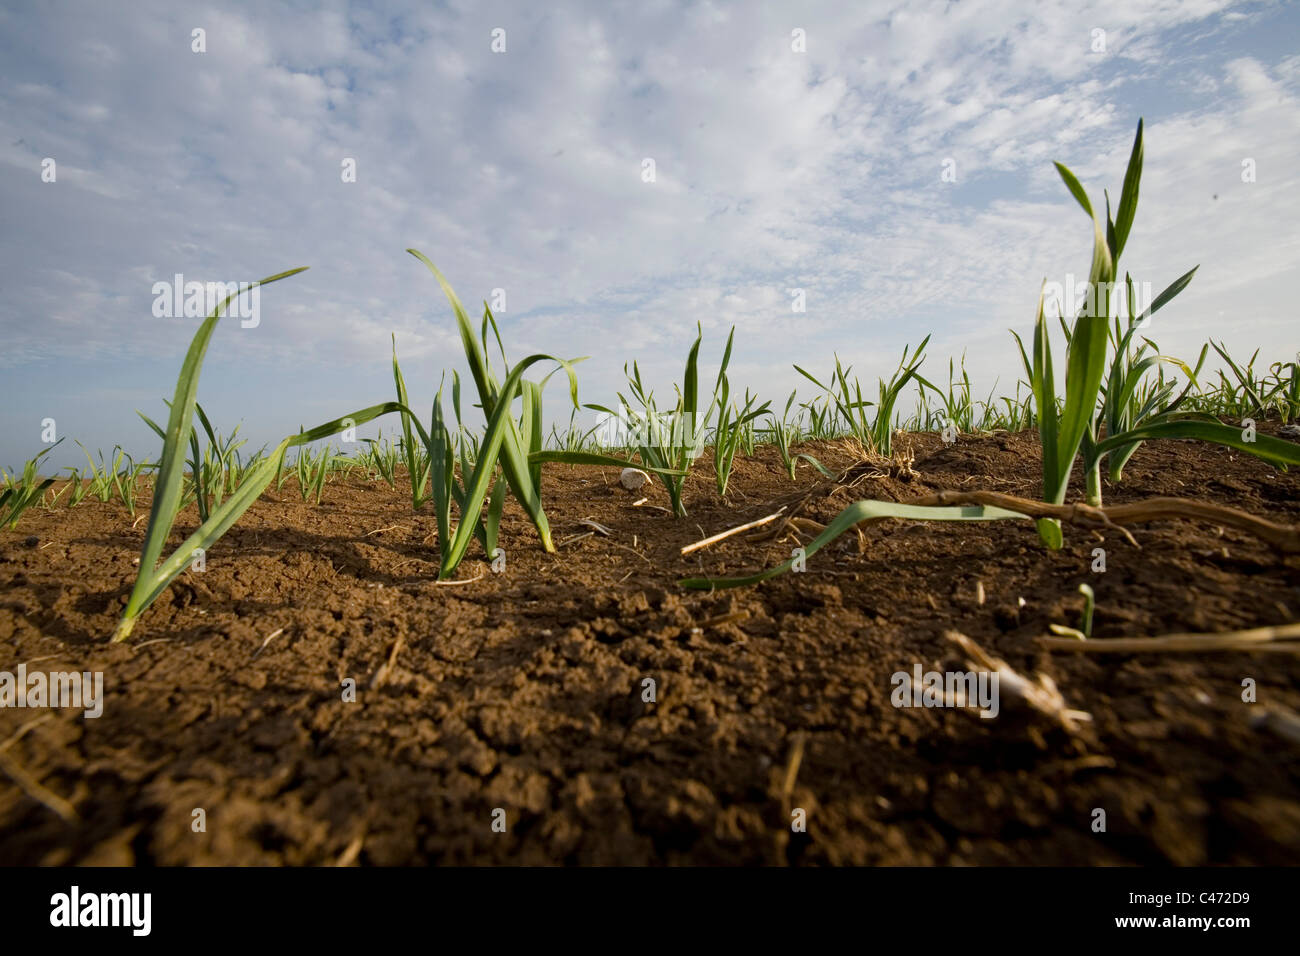 Photograph of a planted field in the Galilee Stock Photo